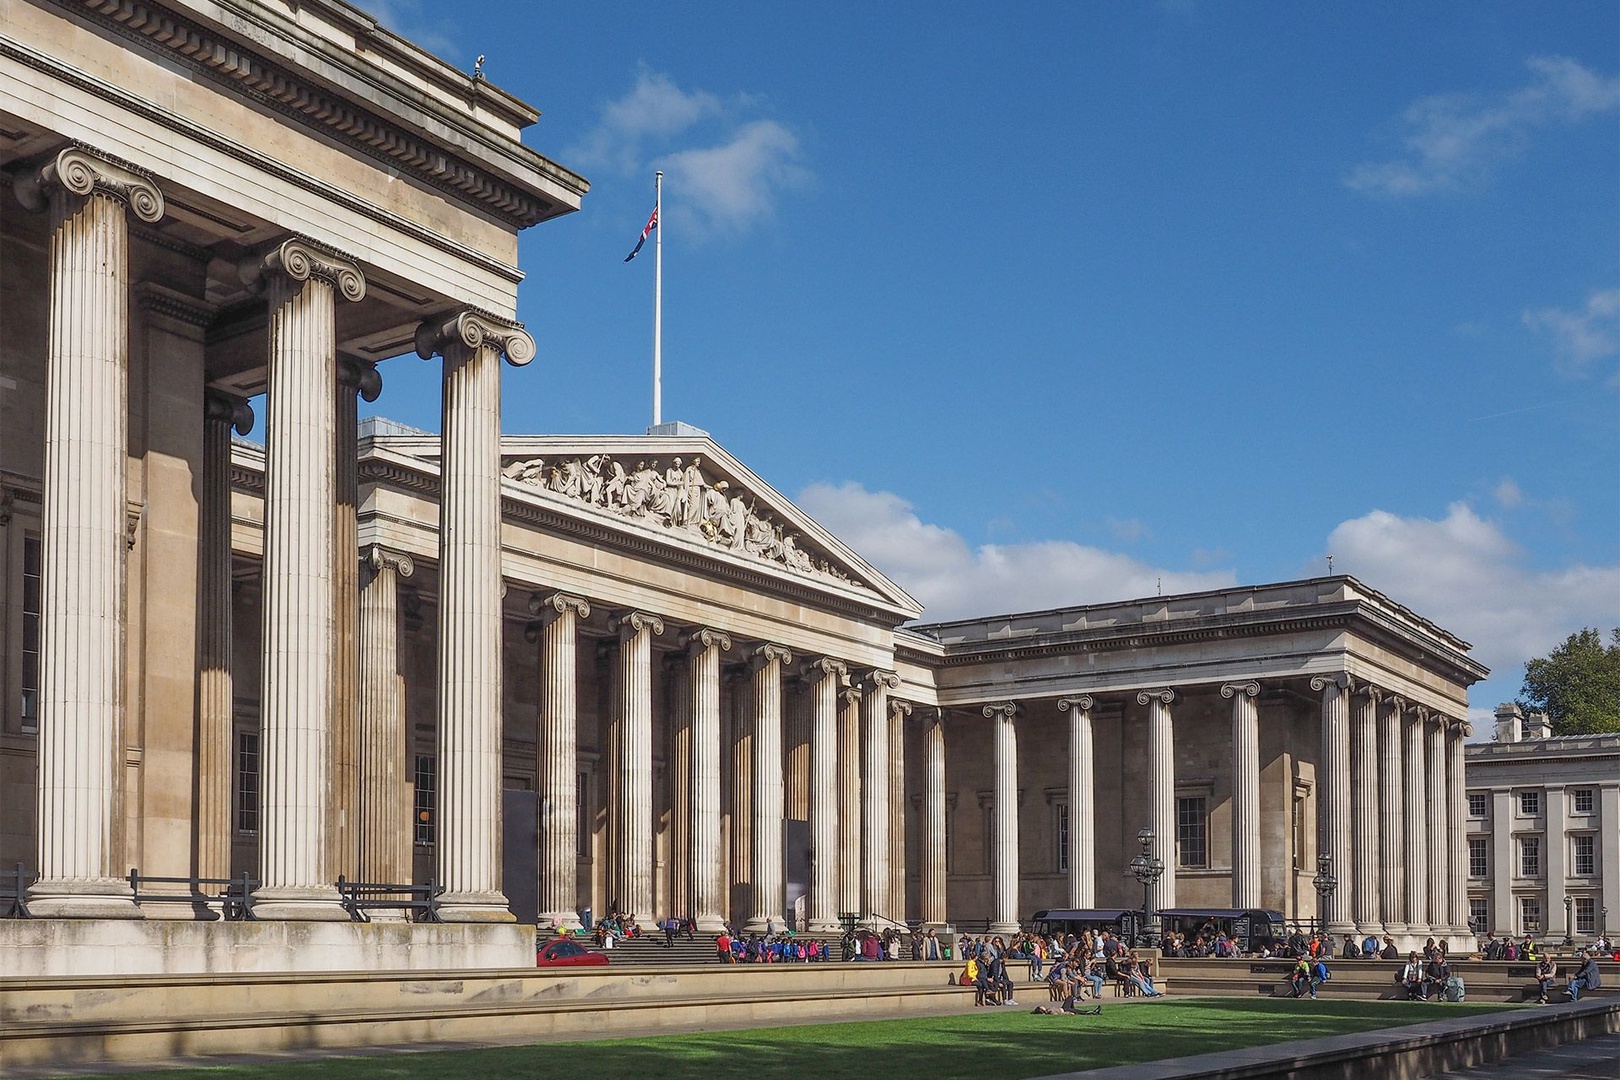 Spend time with your family at the British Museum